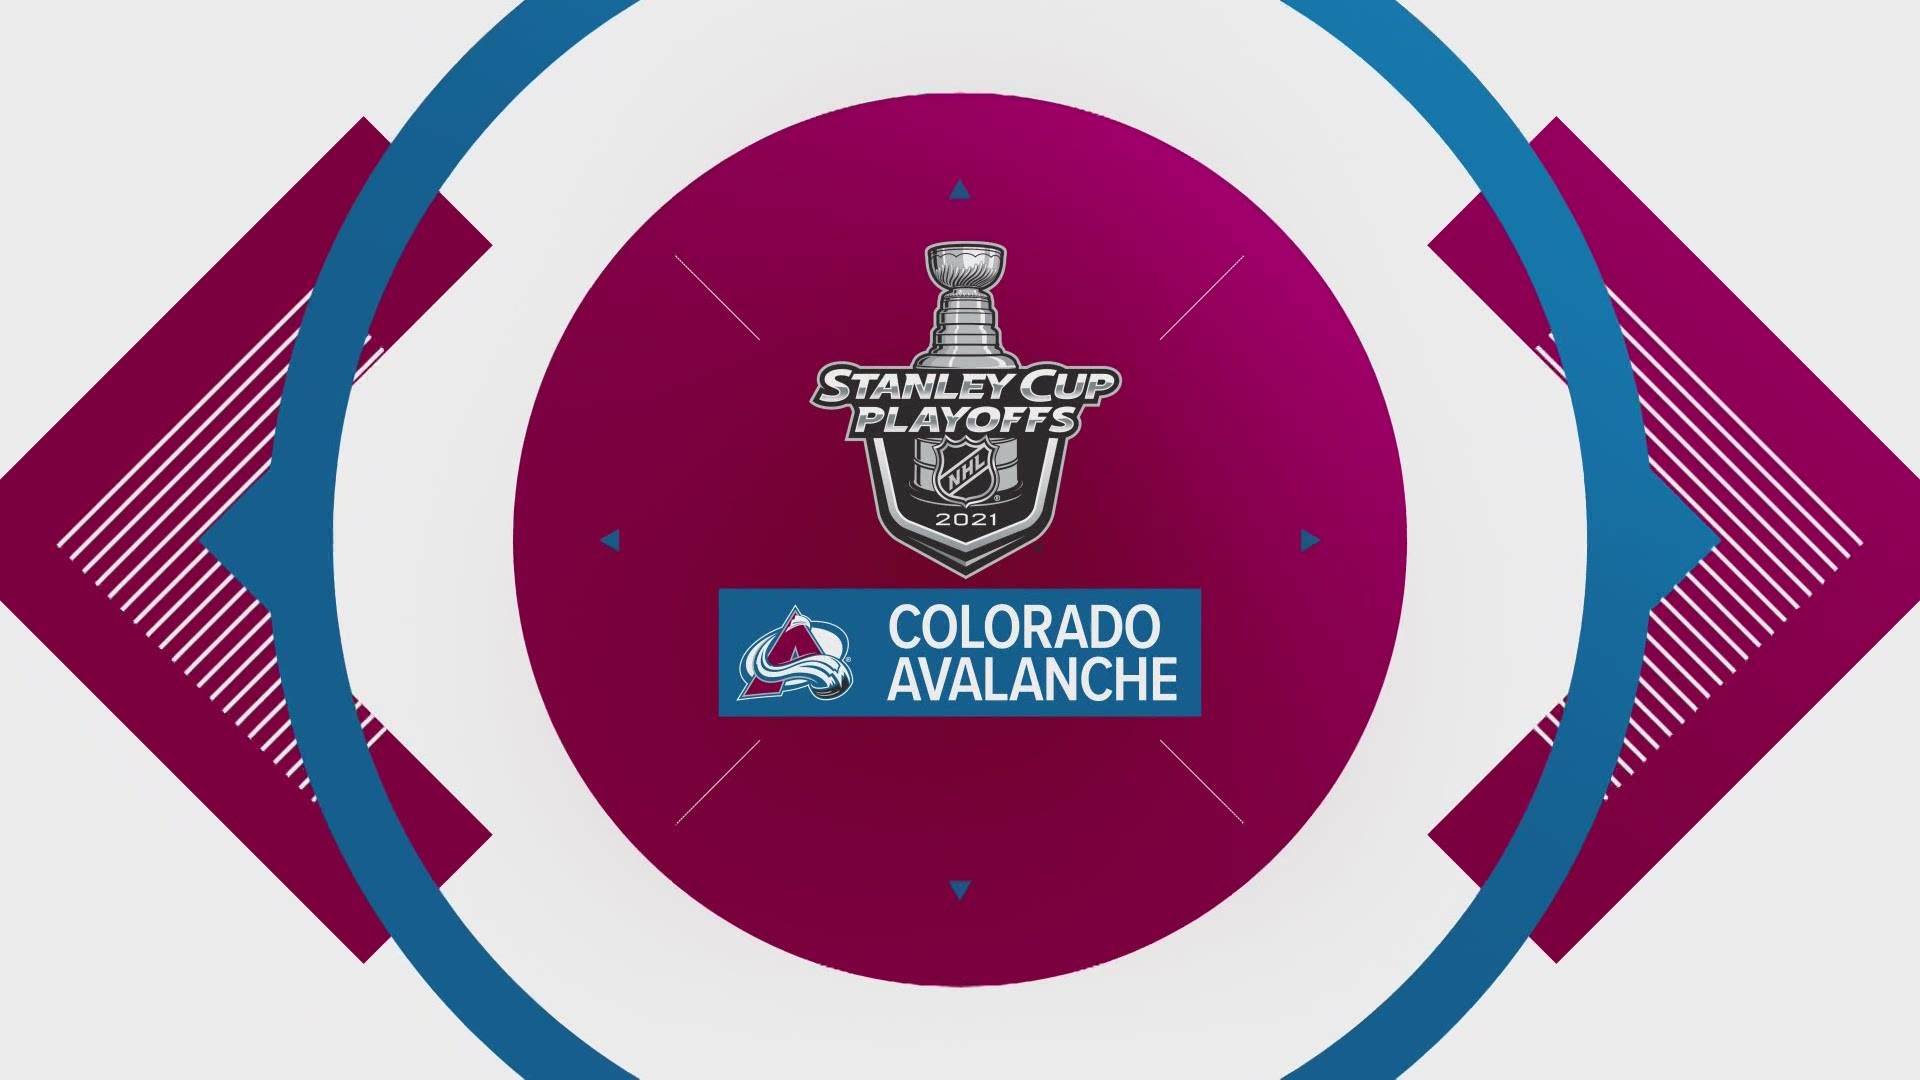 More than 10,000 fans were inside Ball Arena as the Colorado Avalanche crushed the Las Vegas Golden Knights to open the Second Round of the Stanley Cup Playoffs.